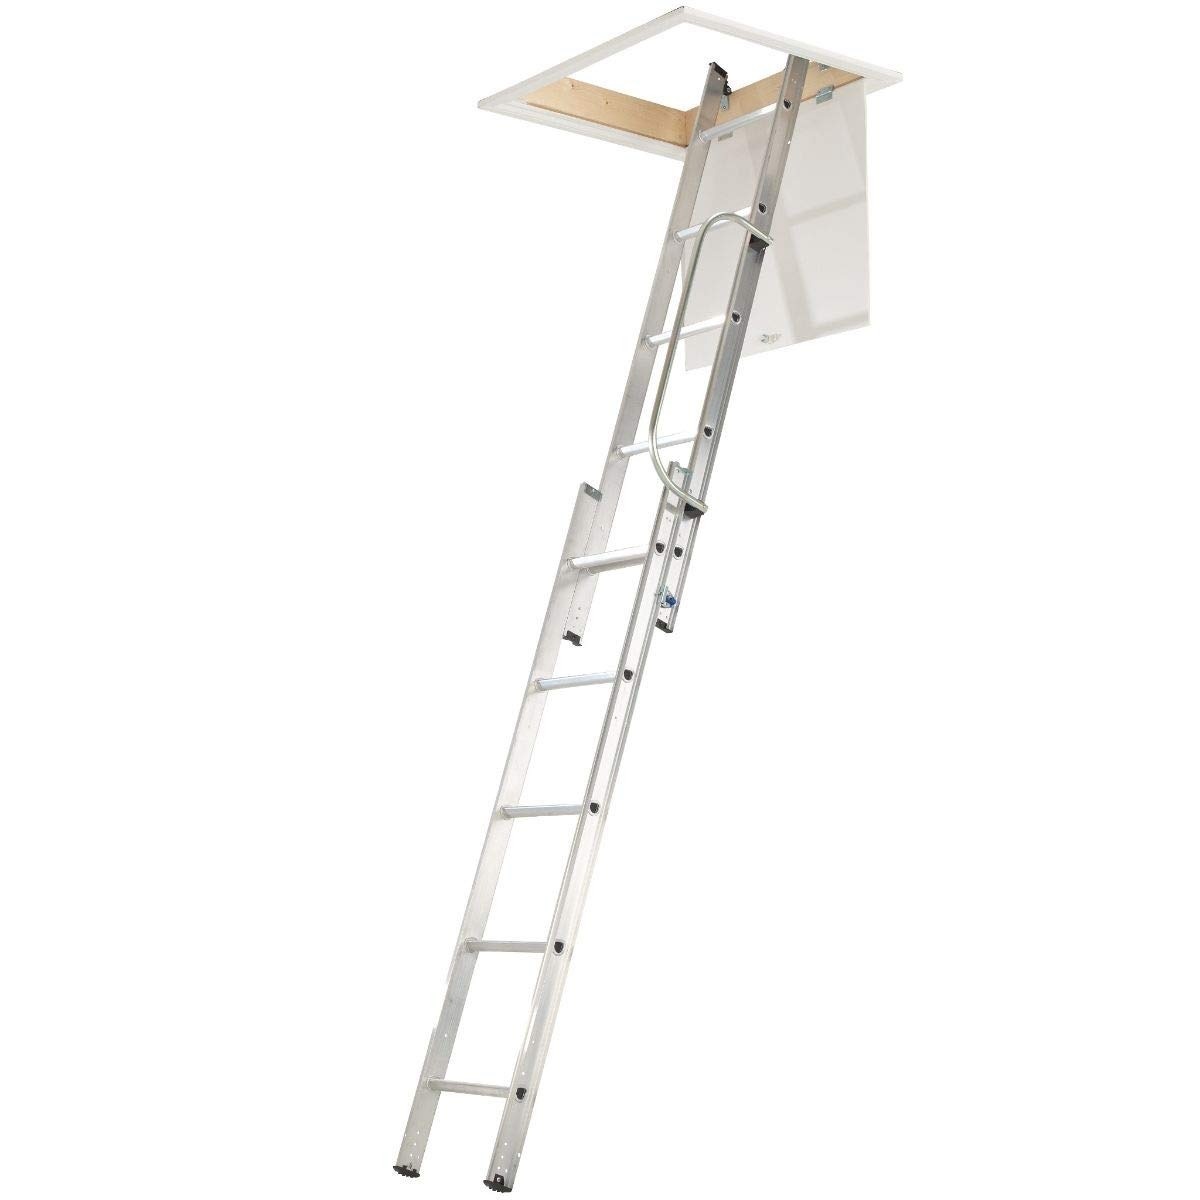 WERNER TWO SECTION ALUMINIUM LOFT LADDER WITH HANDRAIL